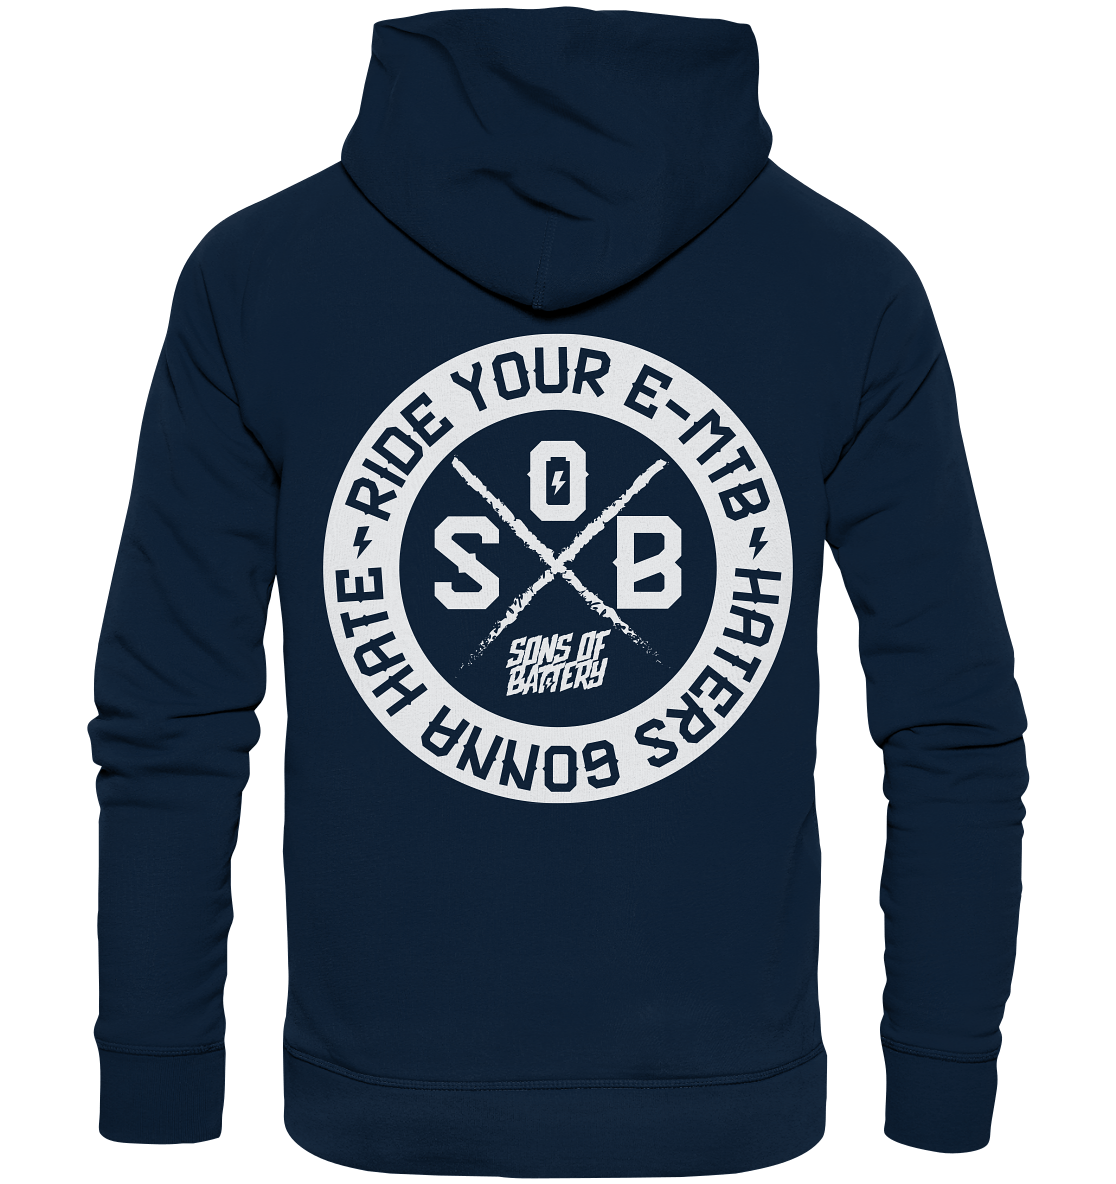 Sons of Battery® - E-MTB Brand & Community Hoodies French Navy / XS Haters gonna Hate - Organic Hoodie (Flip Label) E-Bike-Community